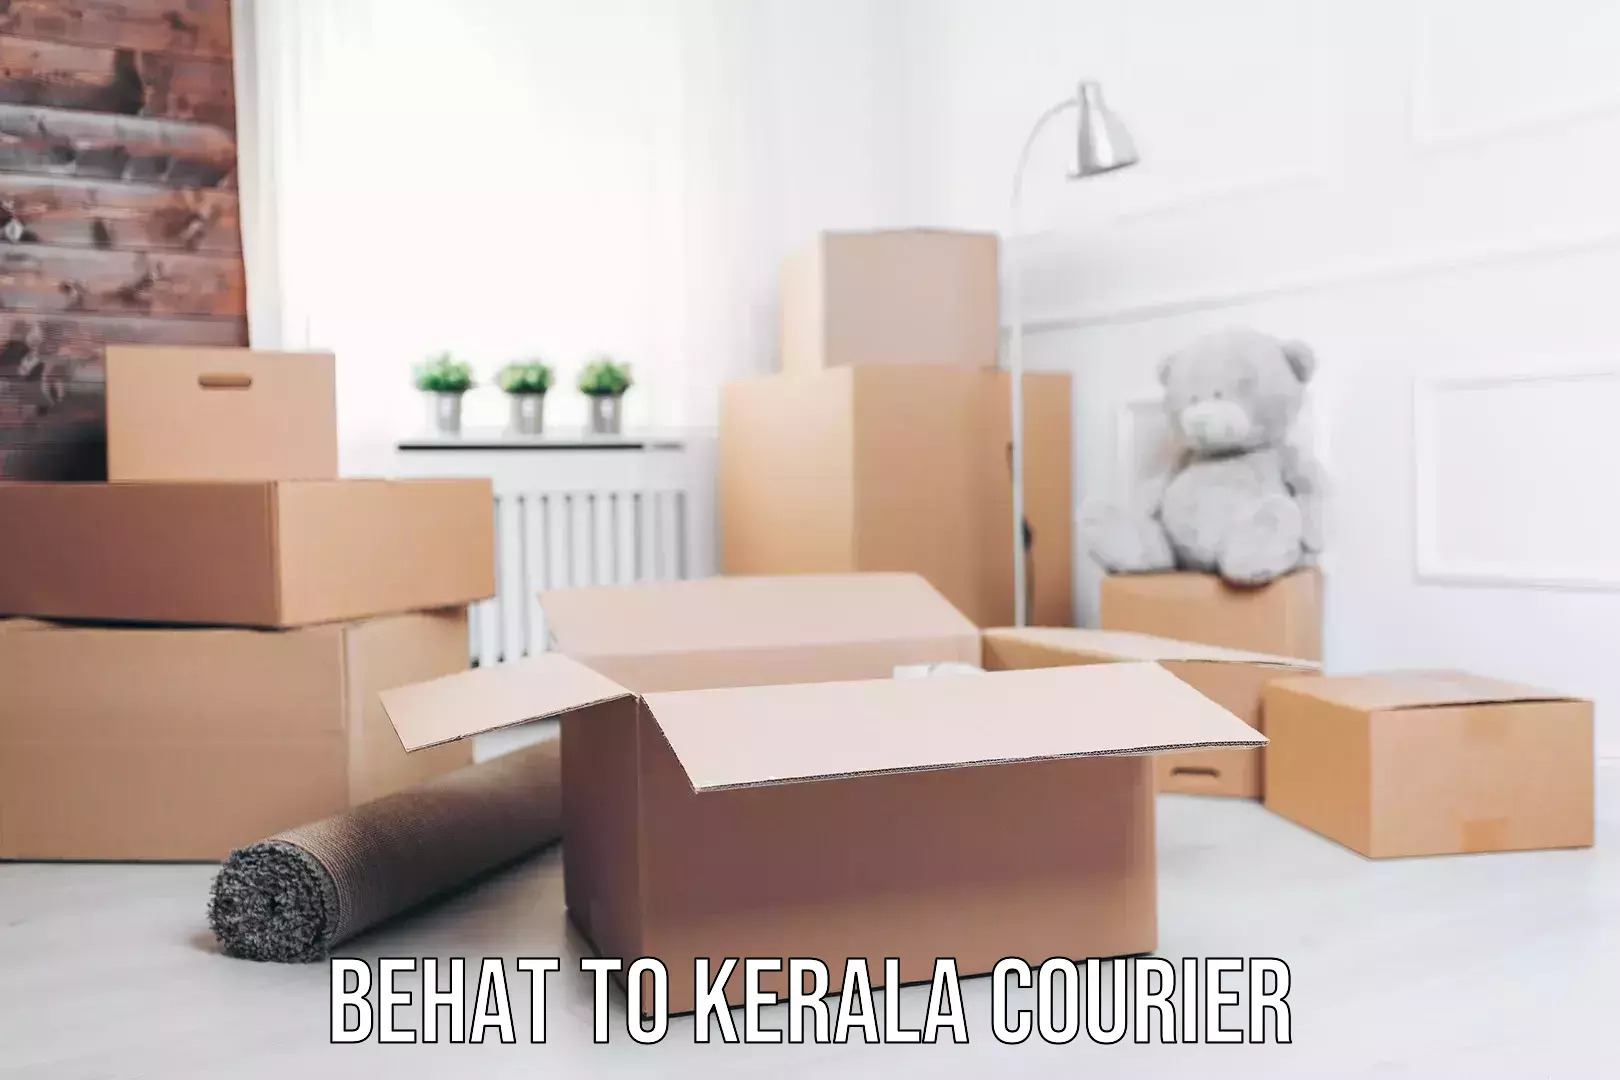 Seamless shipping experience Behat to Kerala